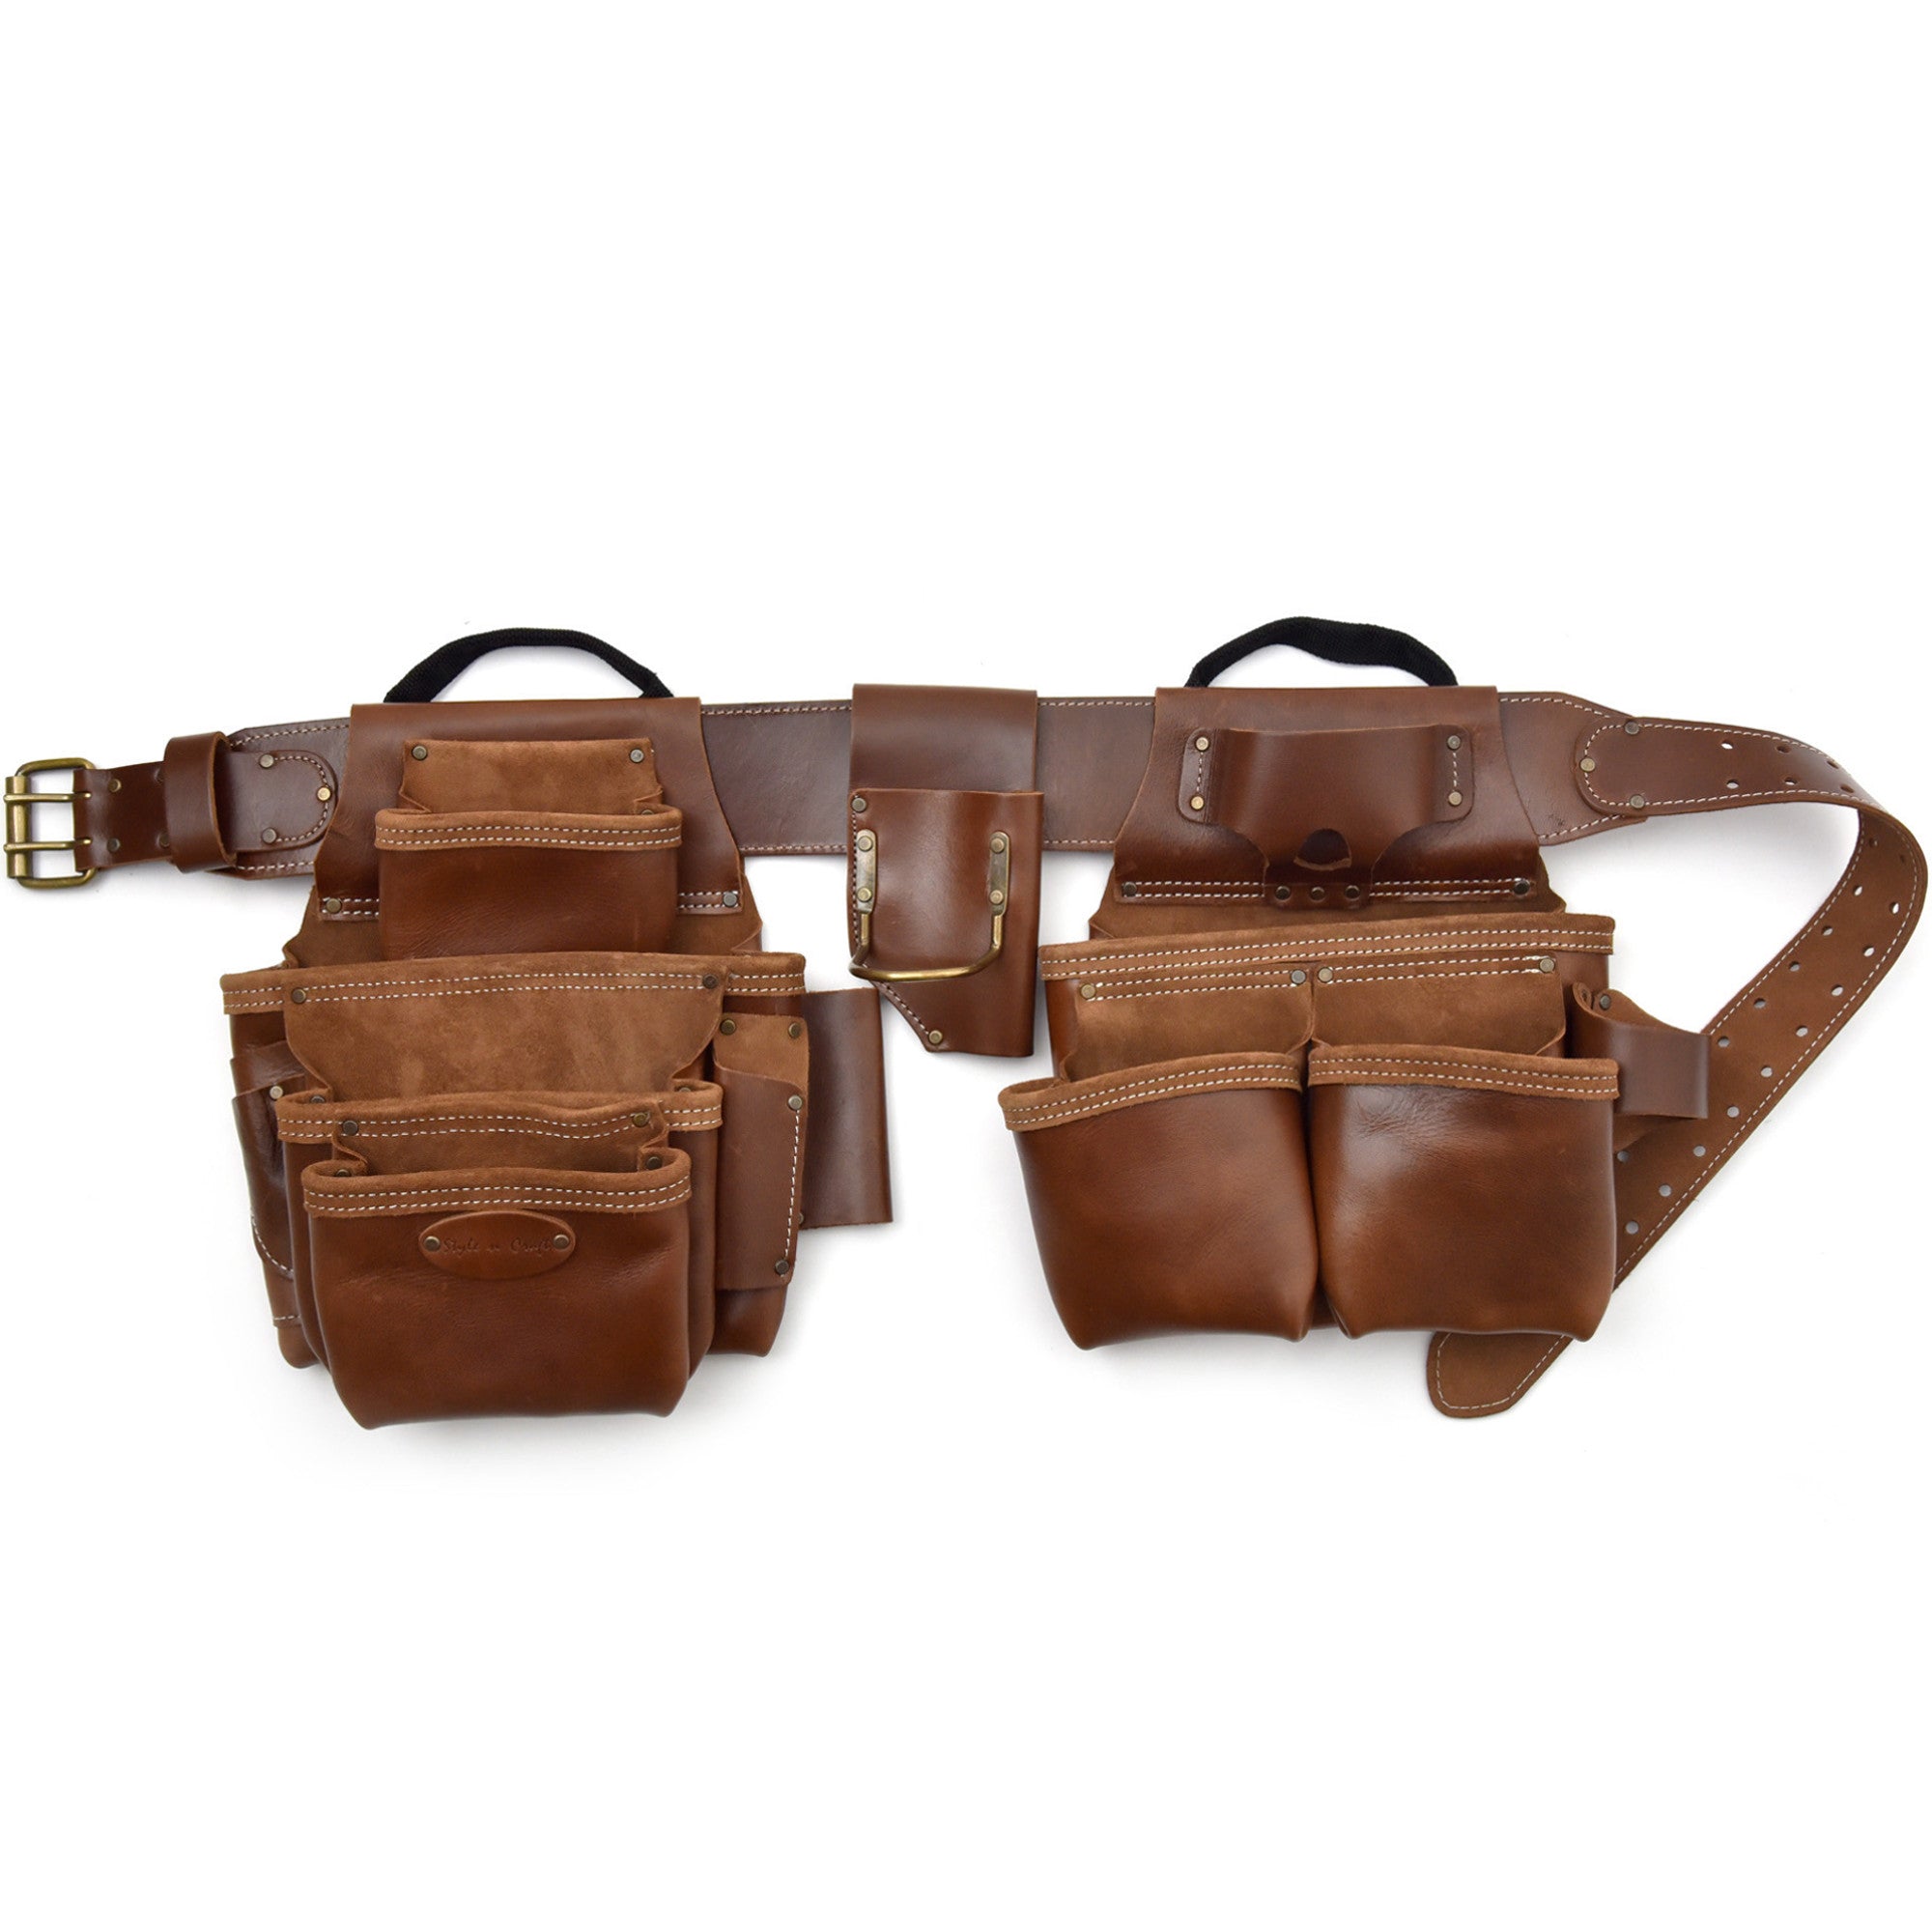 4 Piece 19 Pocket Framer's Combo in Grain Leather | Style n Craft | #98444